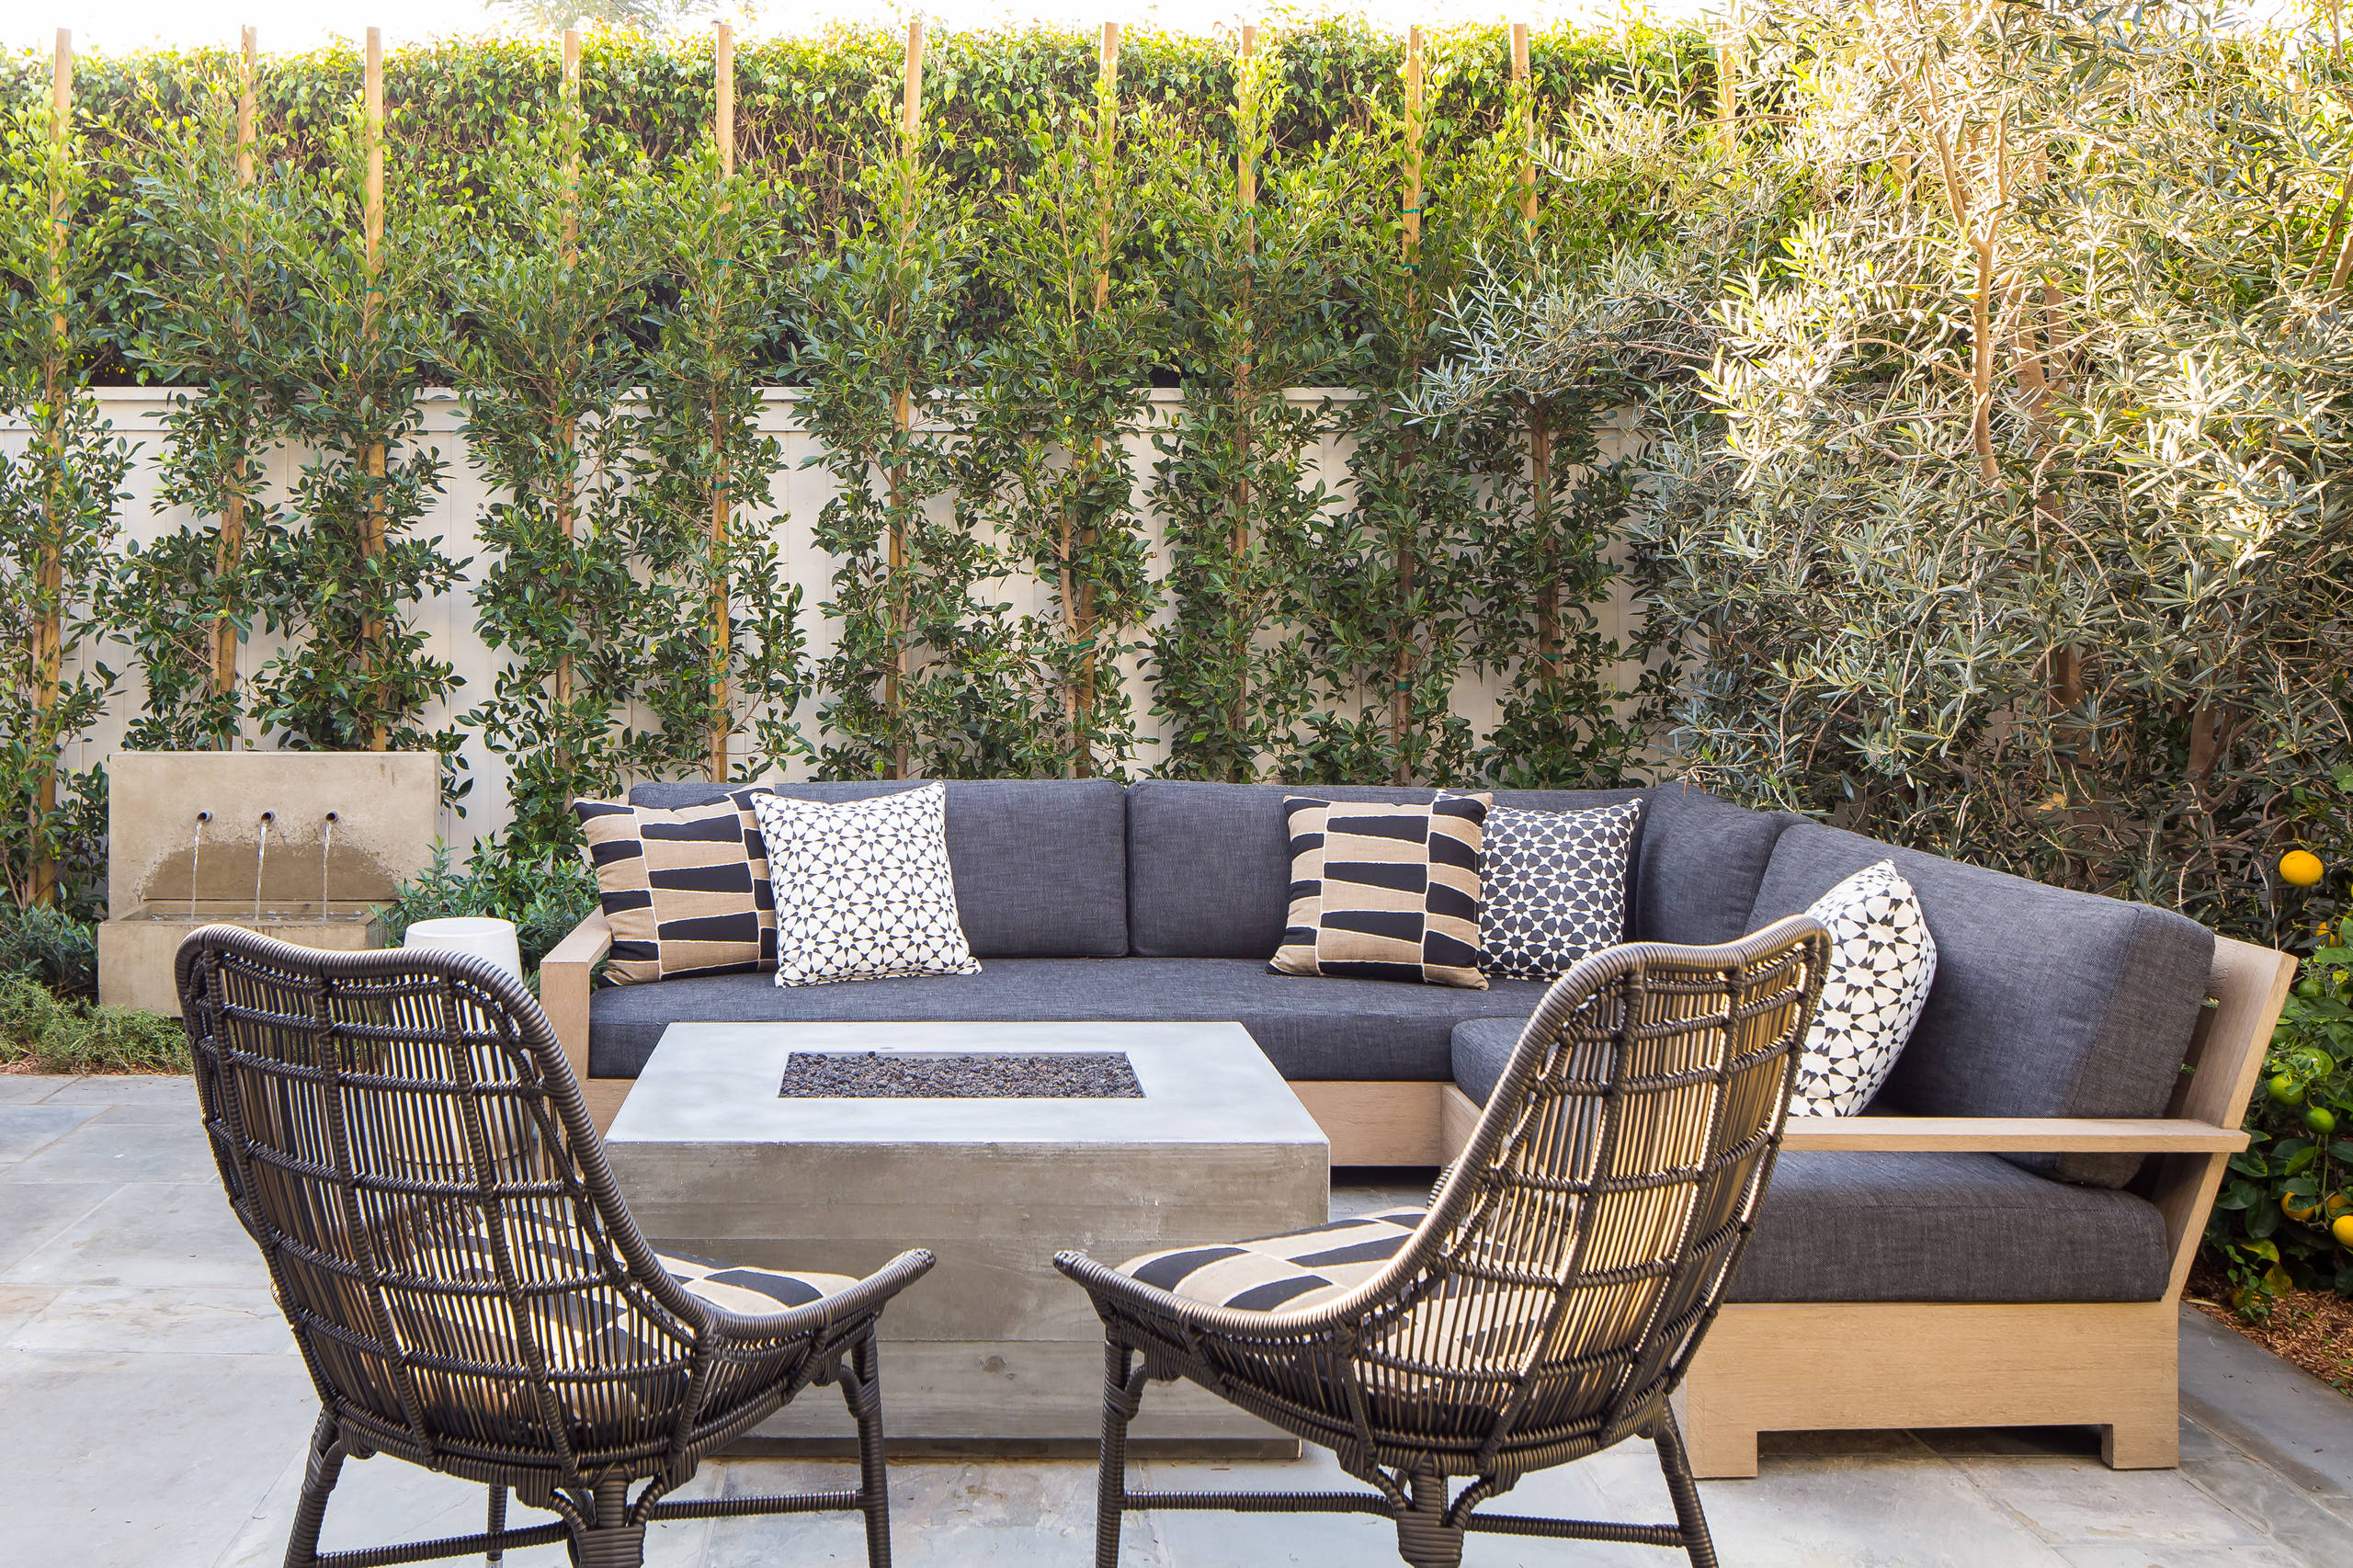 9 Outdoor Living Essentials to Make the Most of Summer | Houzz UK